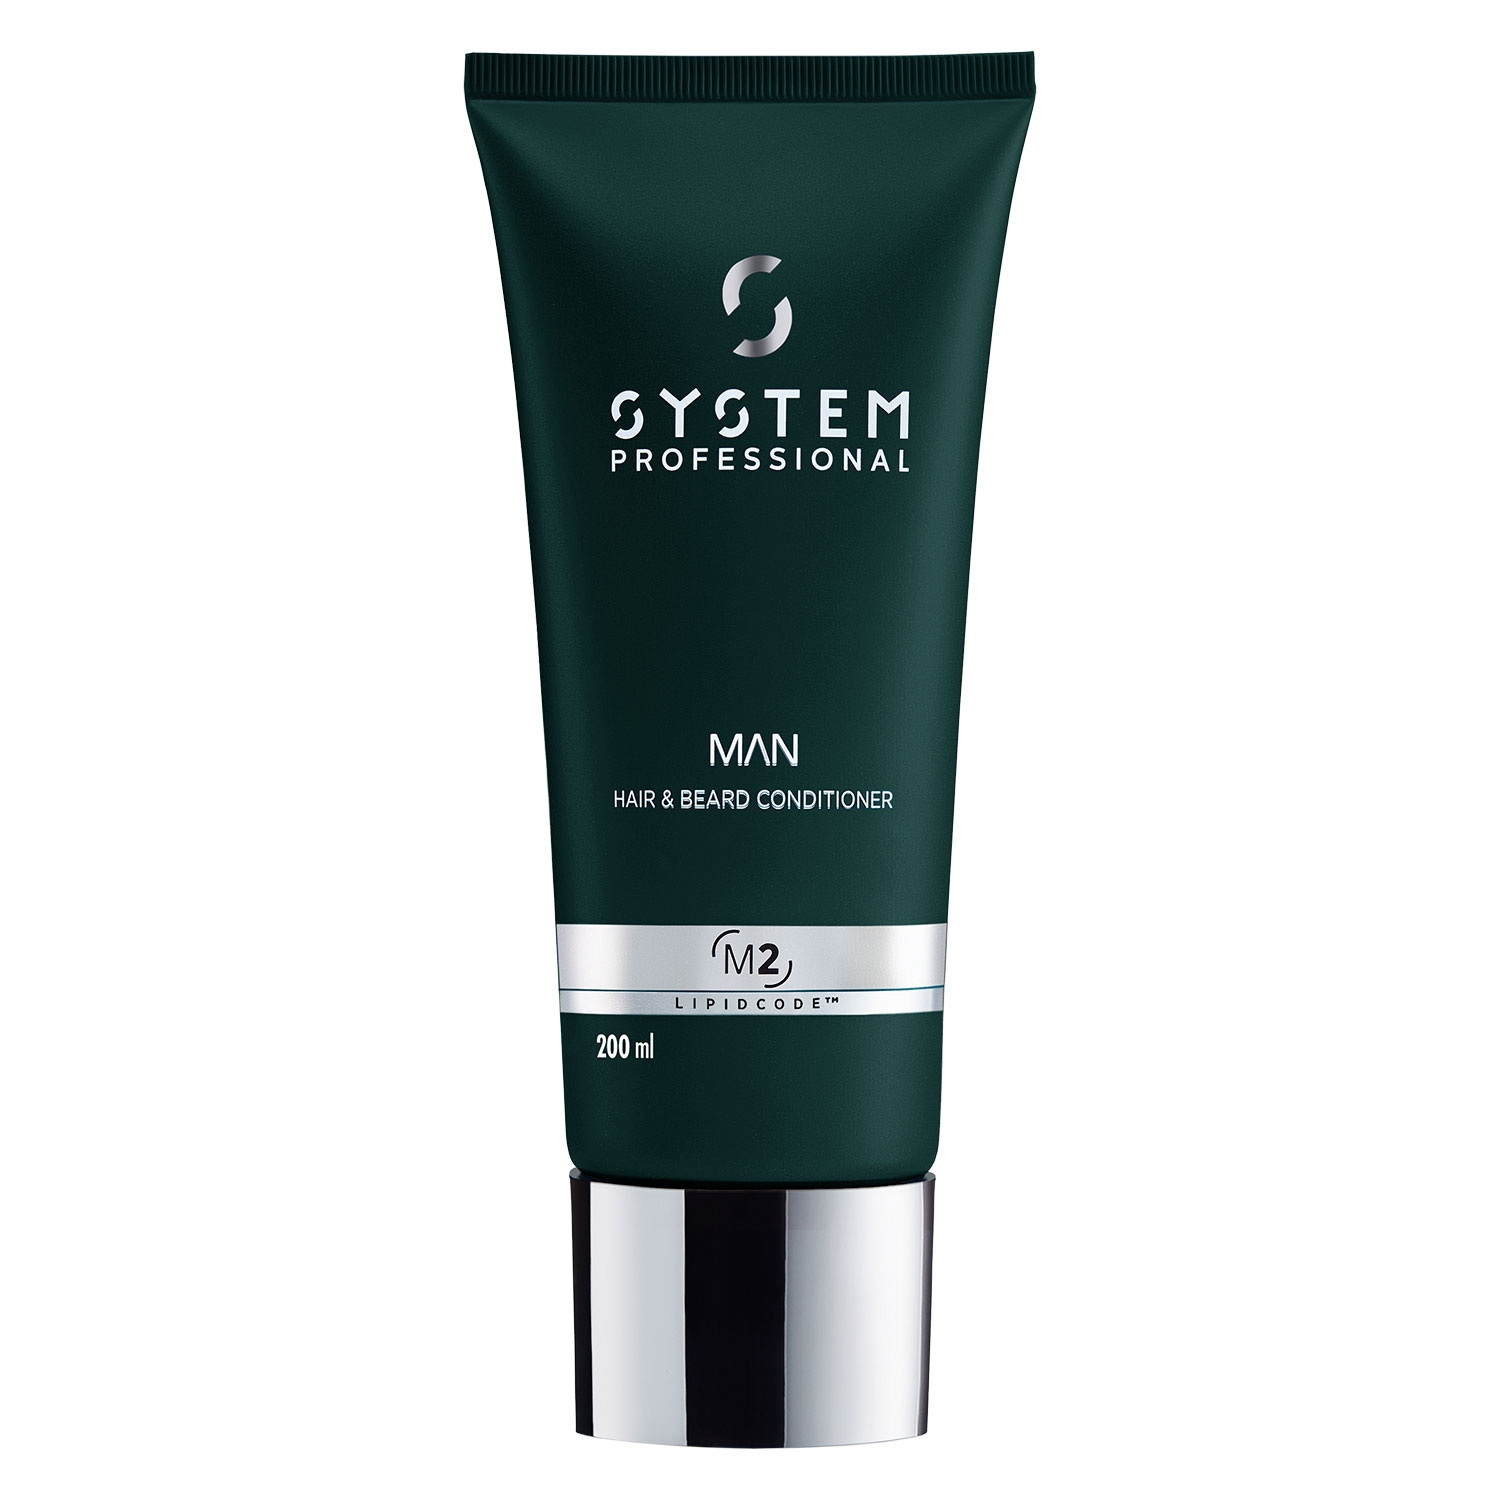 Product image from System Professional Man - Hair & Beard Conditioner